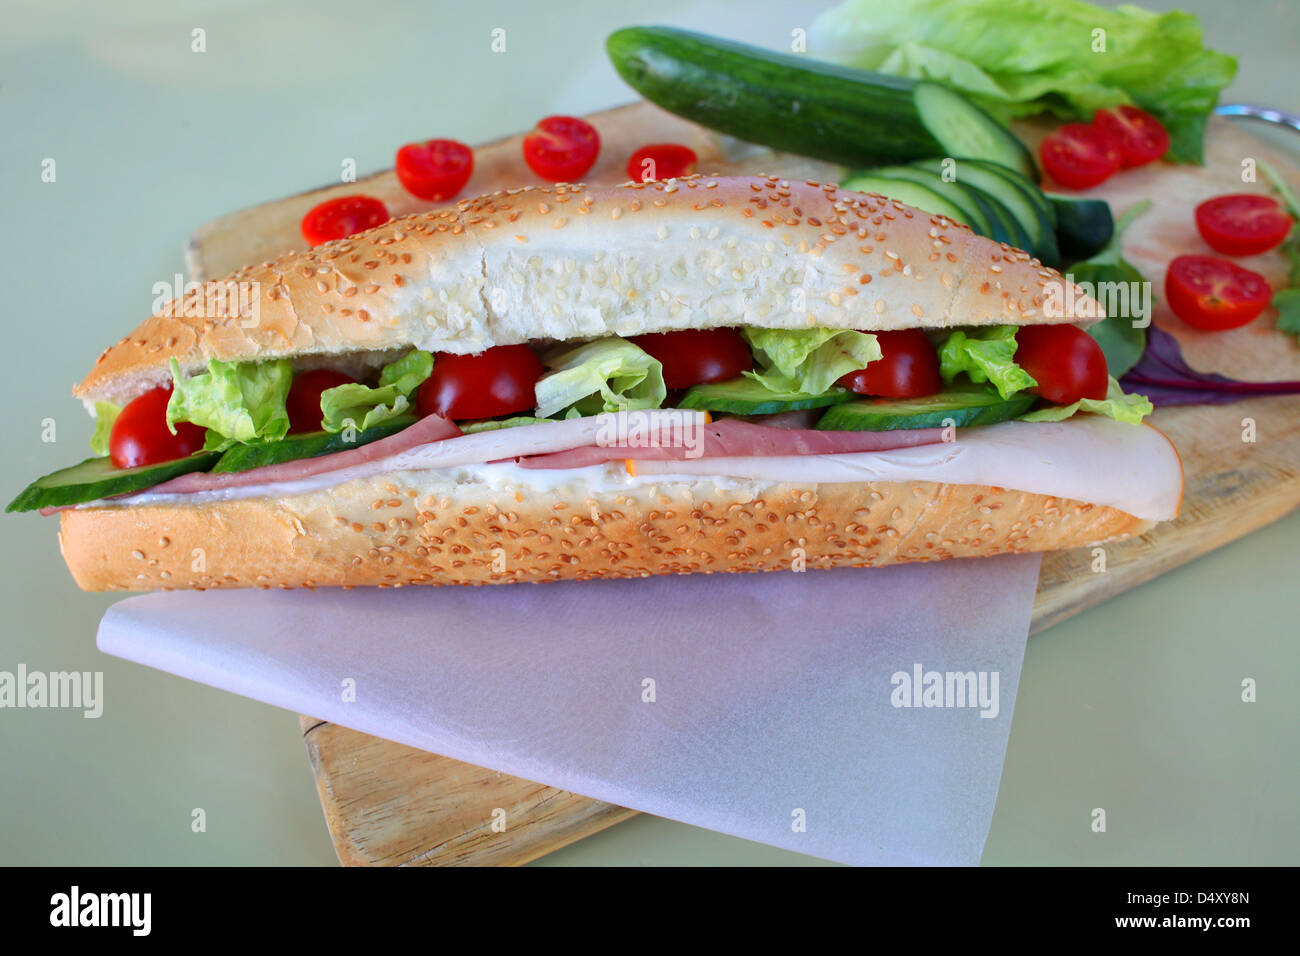 Sandwich with Cold cuts of turkey and beef Stock Photo